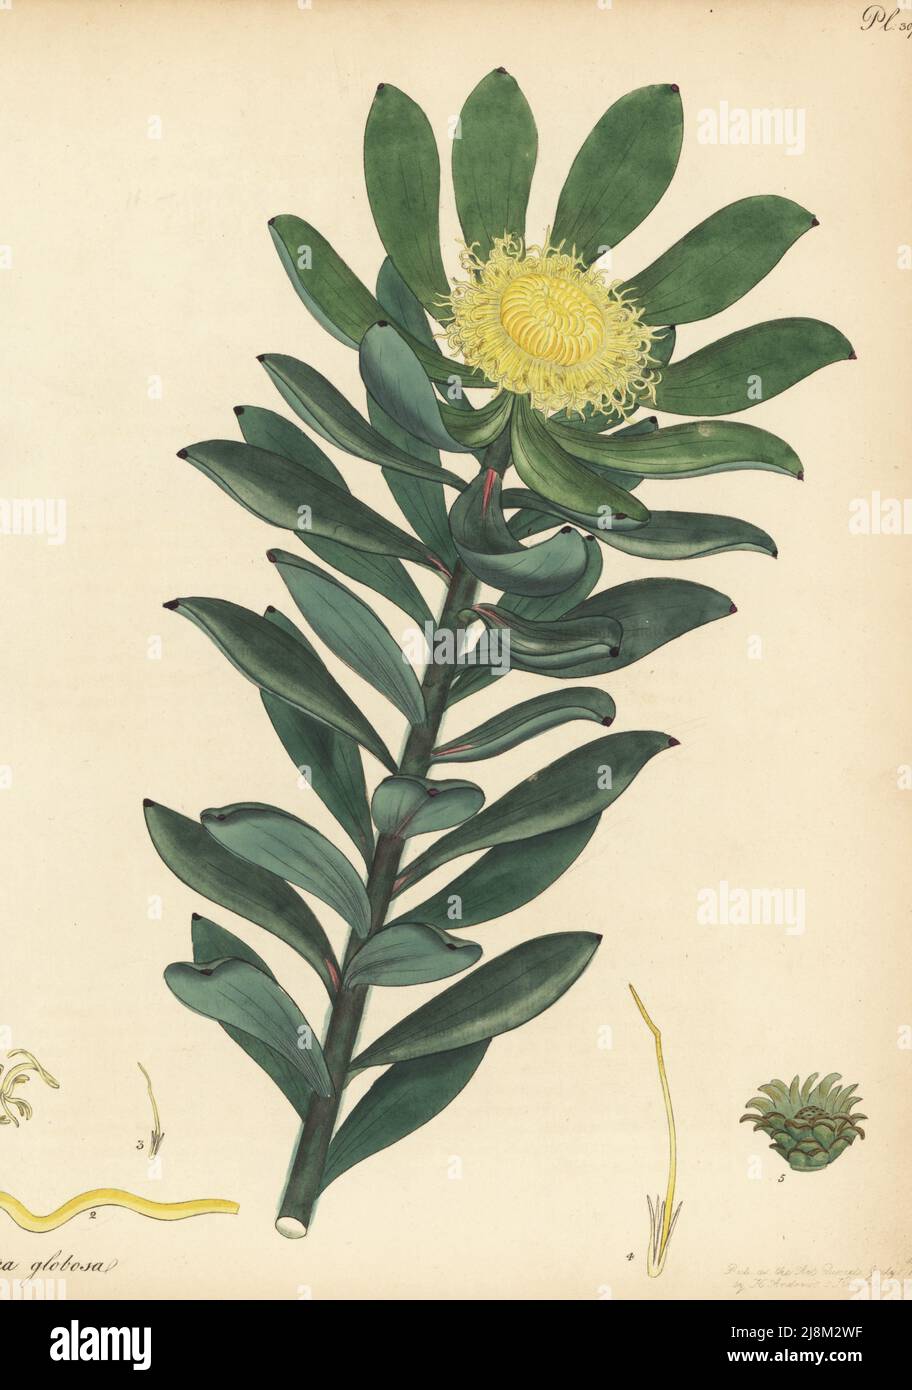 Grabouw conebush, Leucadendron globosum, critically endangered. Globe-flowered protea, Protea globosa. From the Cape of Good Hope, South Africa, in the George Hibbert collection. Copperplate engraving drawn, engraved and hand-coloured by Henry Andrews from his Botanical Register, Volume 5, self-published in Knightsbridge, London, 1803. Stock Photo